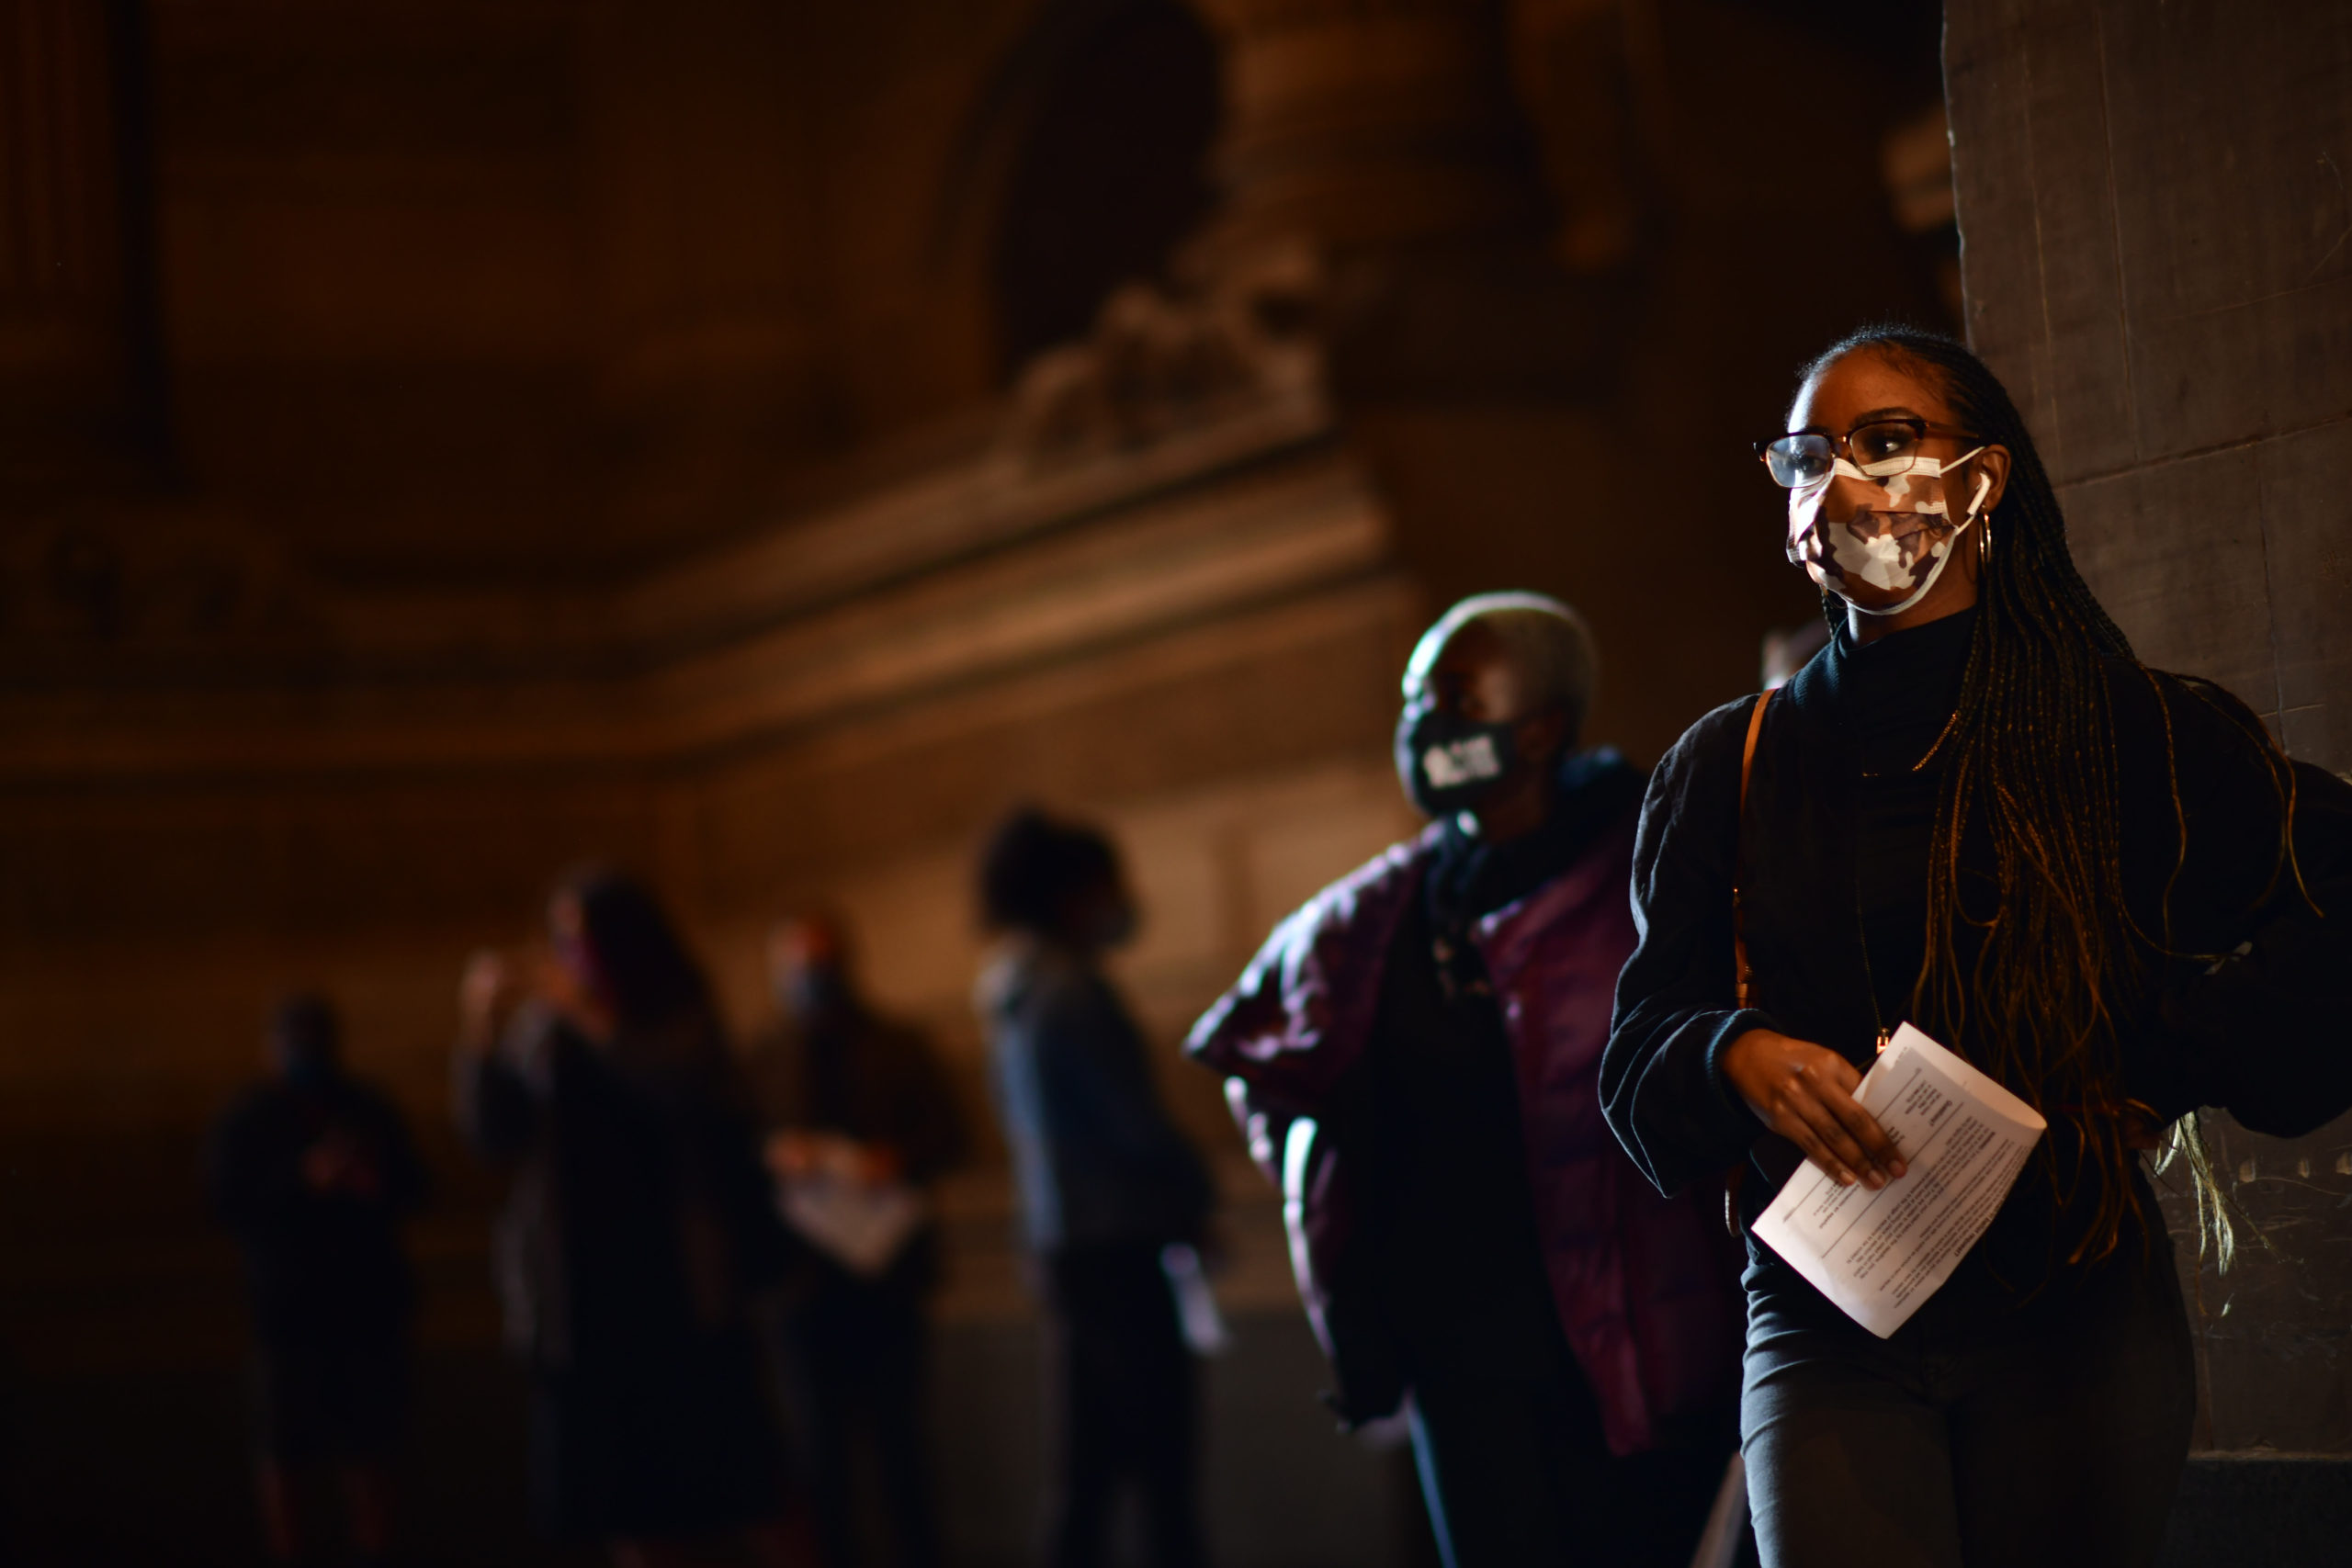 Voters wait in line outside Philadelphia City Hall to cast their early voting ballots at the satellite polling station in Oct. 2020 in Philadelphia. This new form of in-person voting by using mail ballots has enabled tens of millions of voters to cast their ballots before the general election